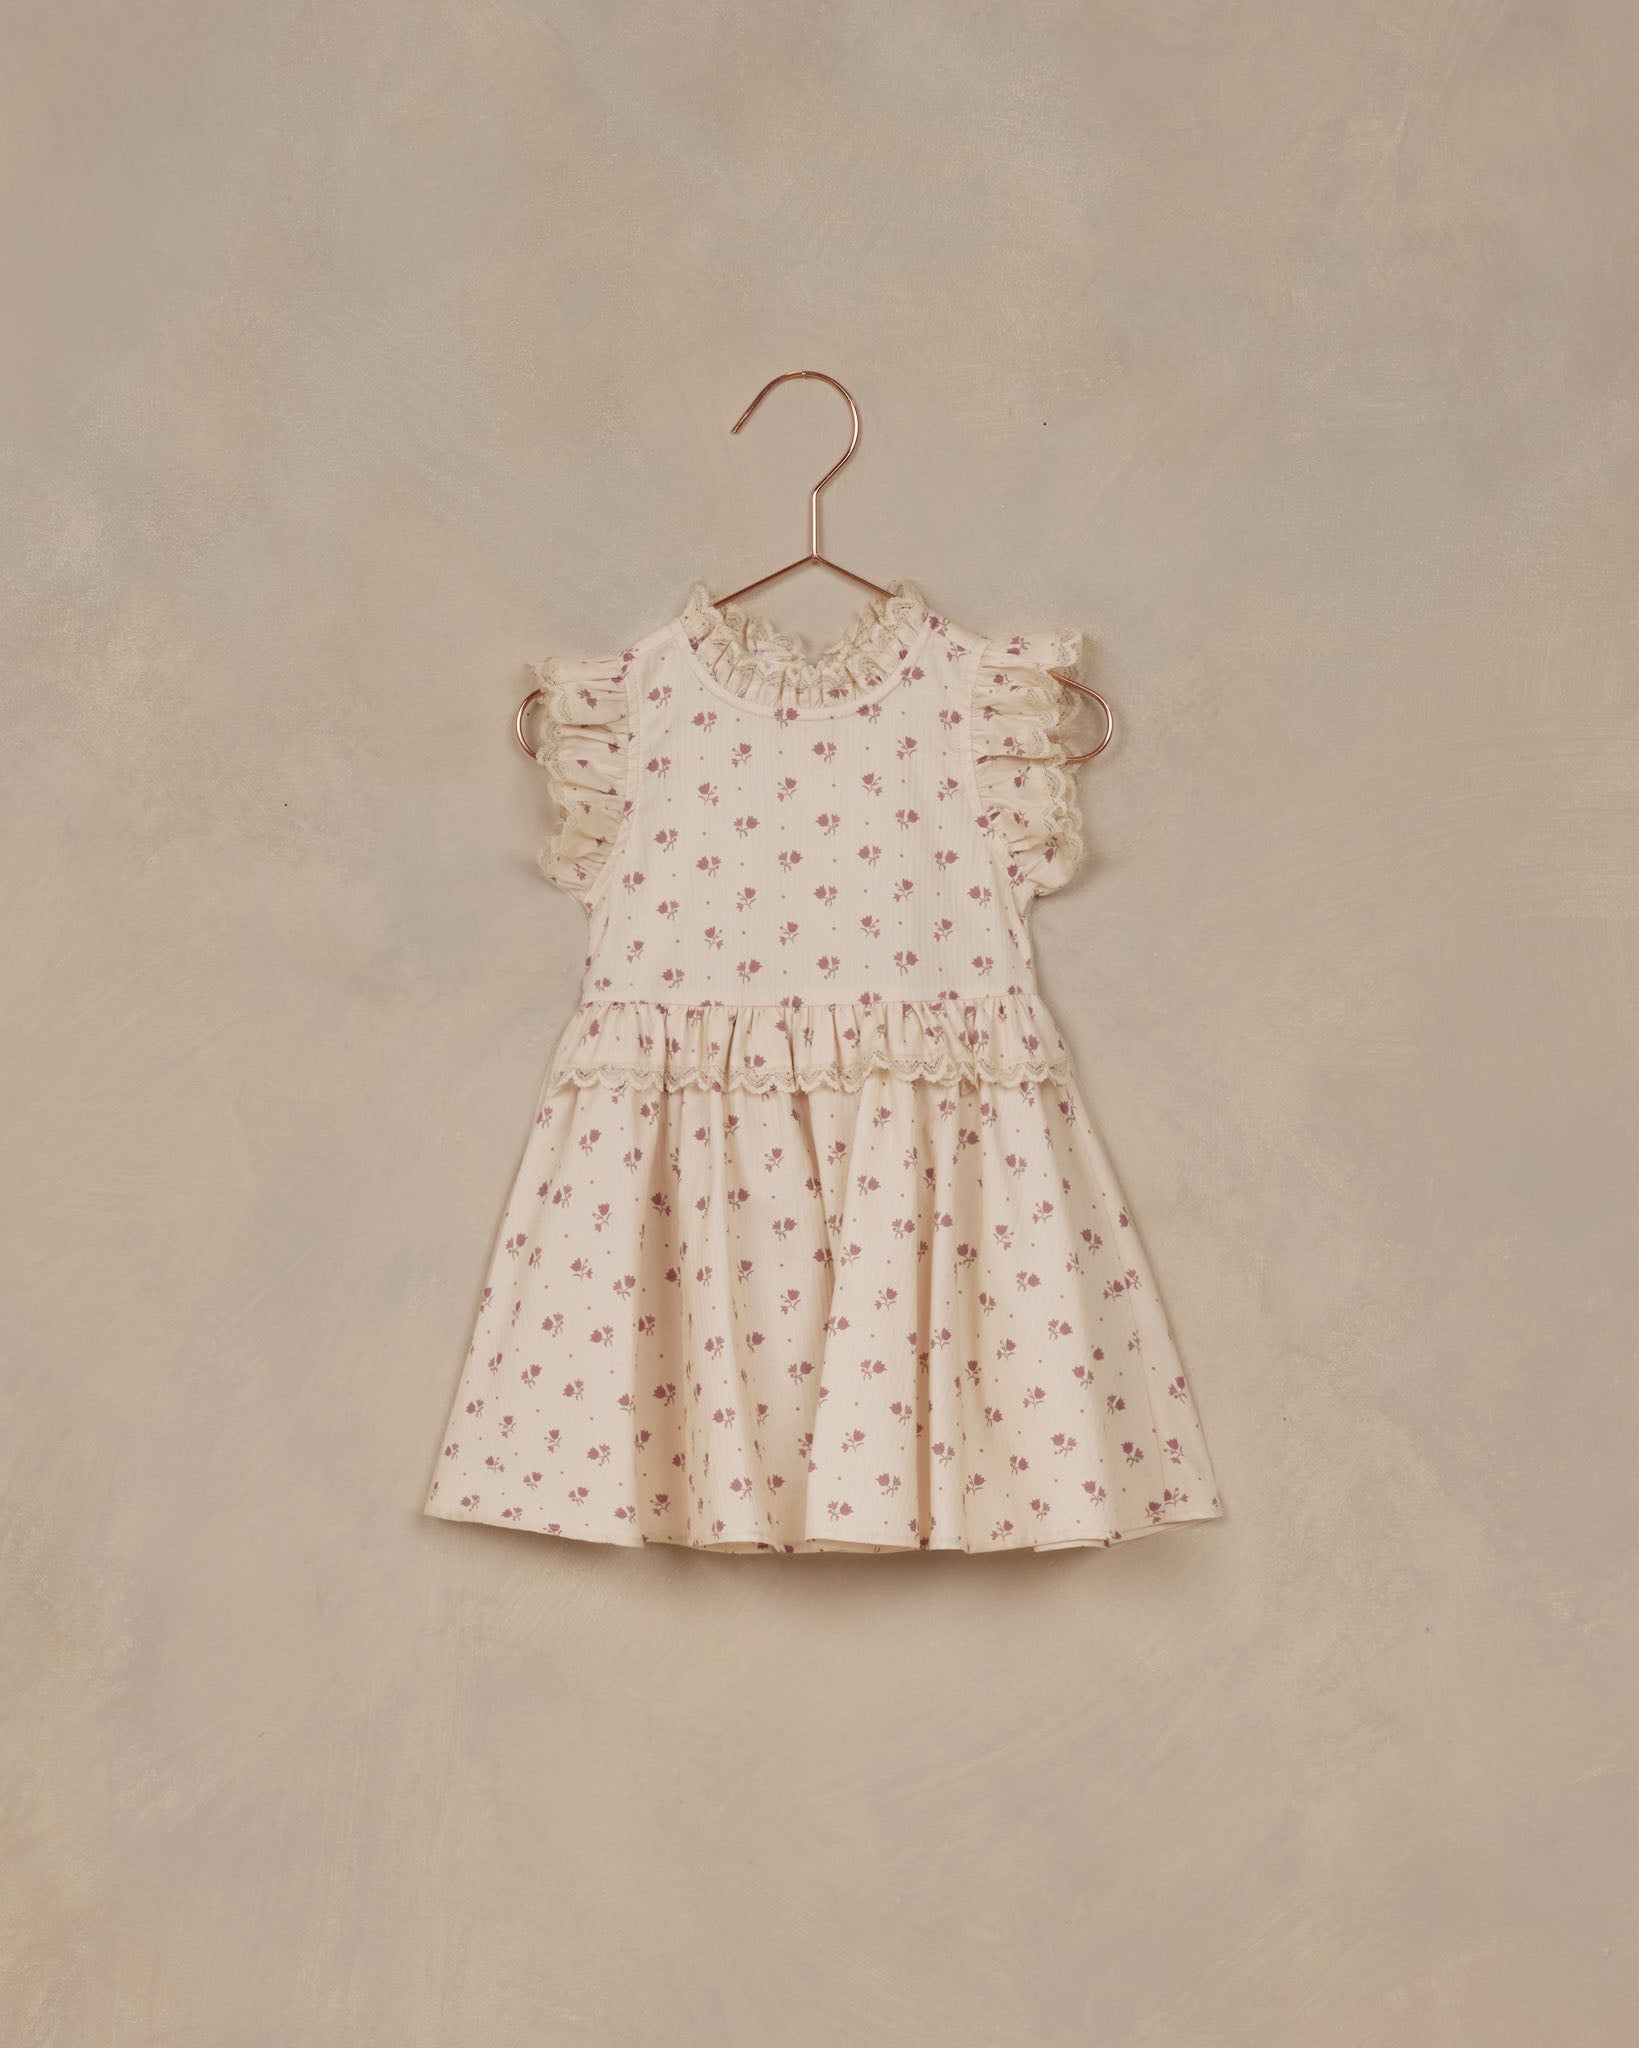 Alice Dress || Tulips - Rylee + Cru | Kids Clothes | Trendy Baby Clothes | Modern Infant Outfits |